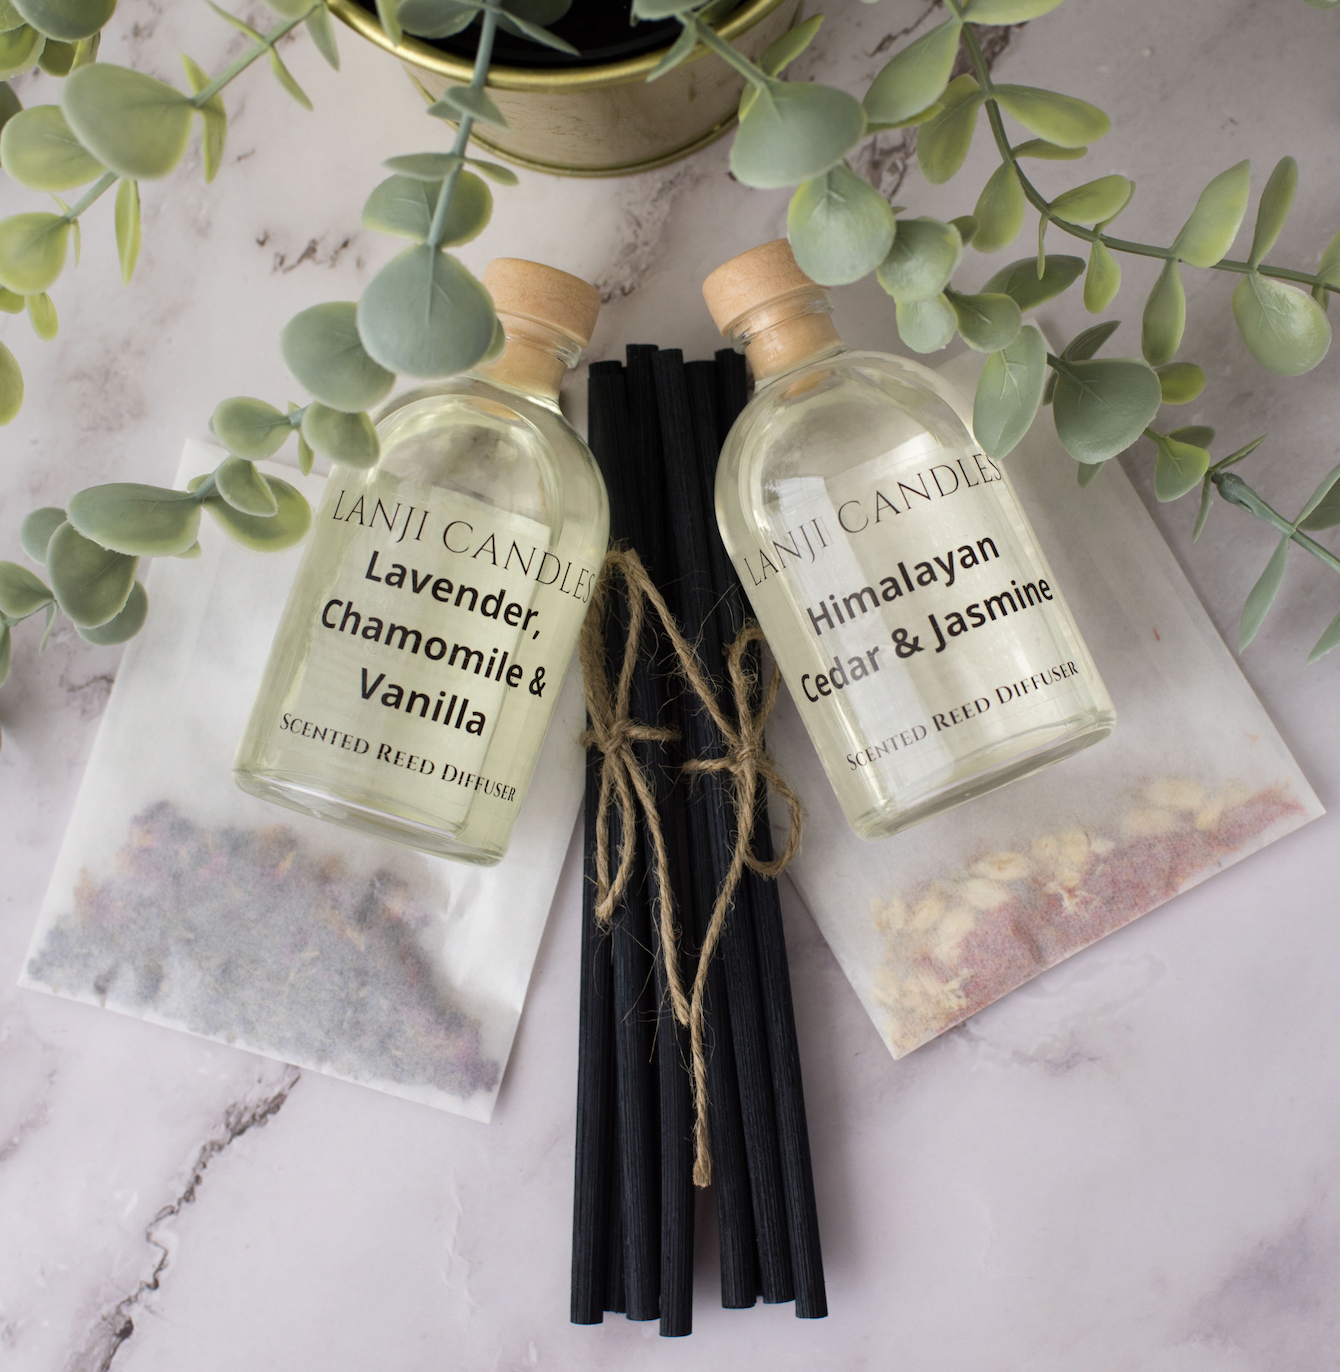 Diffuser Oil Refill With Replacement Reeds And Botanicals